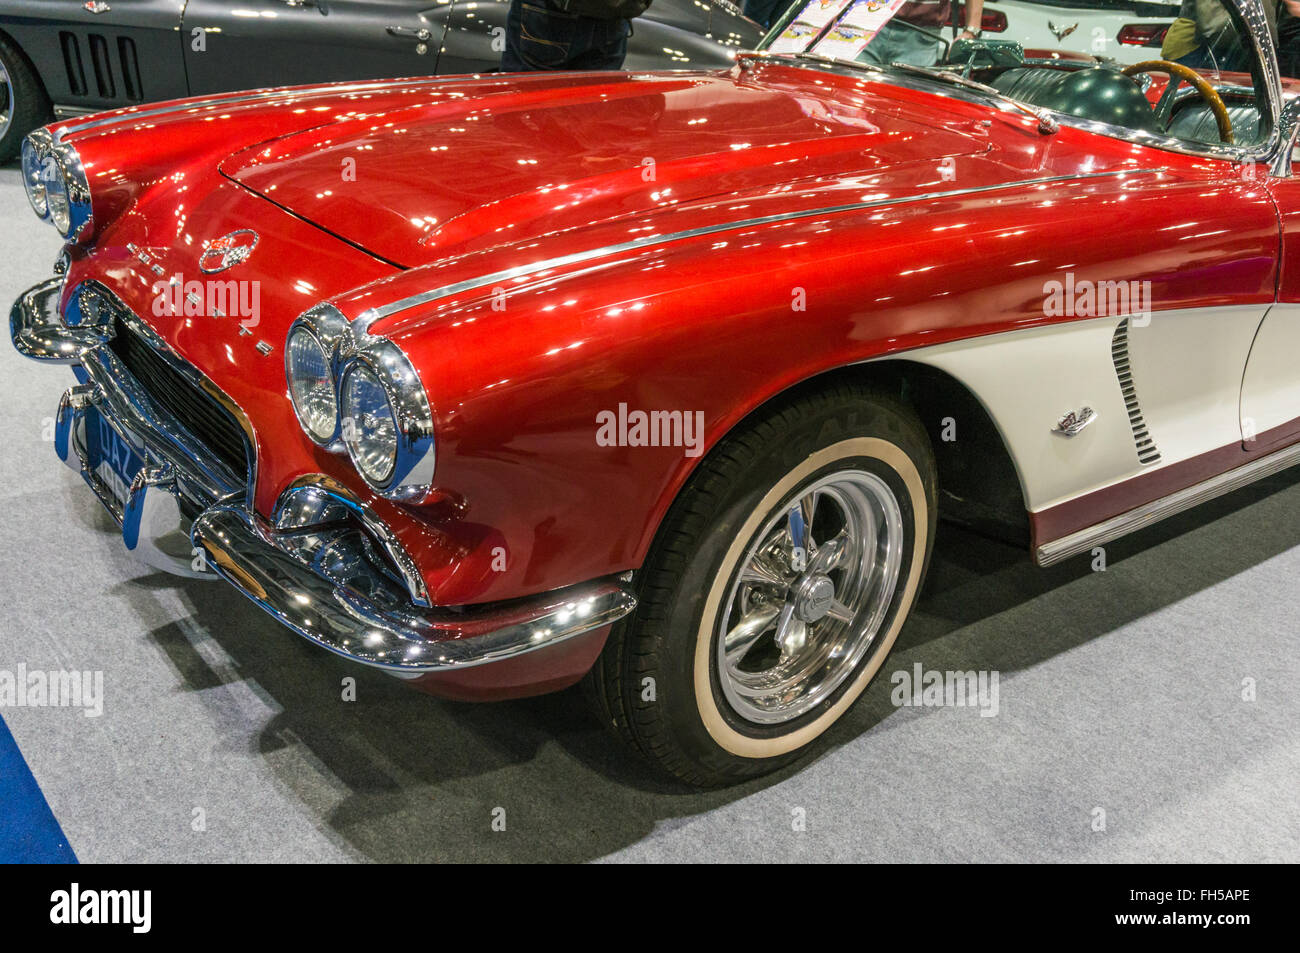 Corvette on display at the 2016 London Classic Car Show Stock Photo